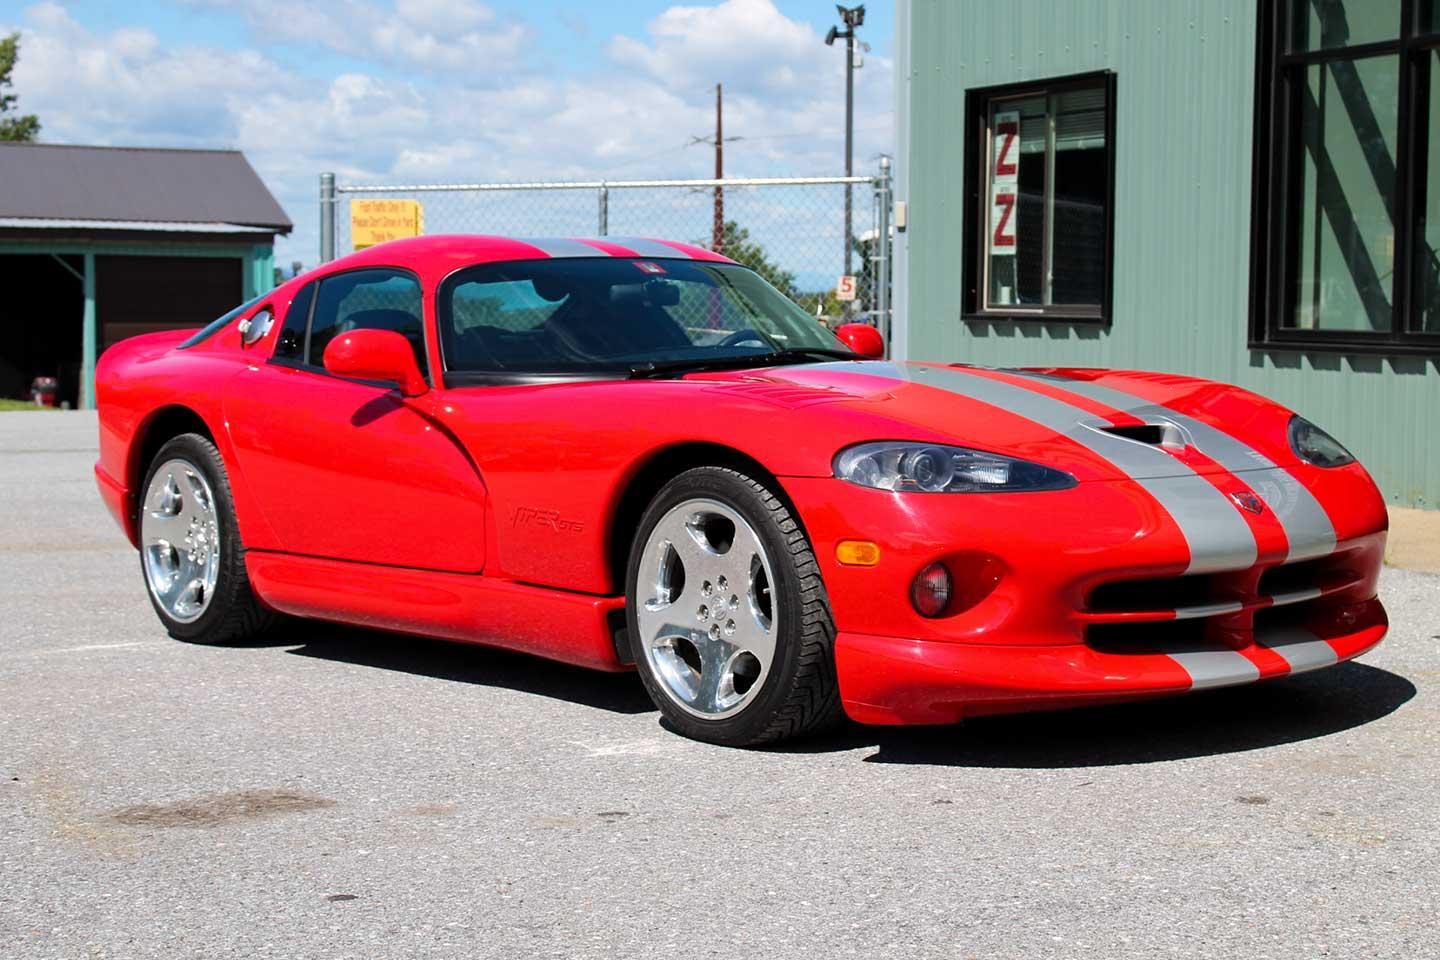 2000 Dodge GTS Viper (Previously owned by NASCAR Champion Bill Elliott!)